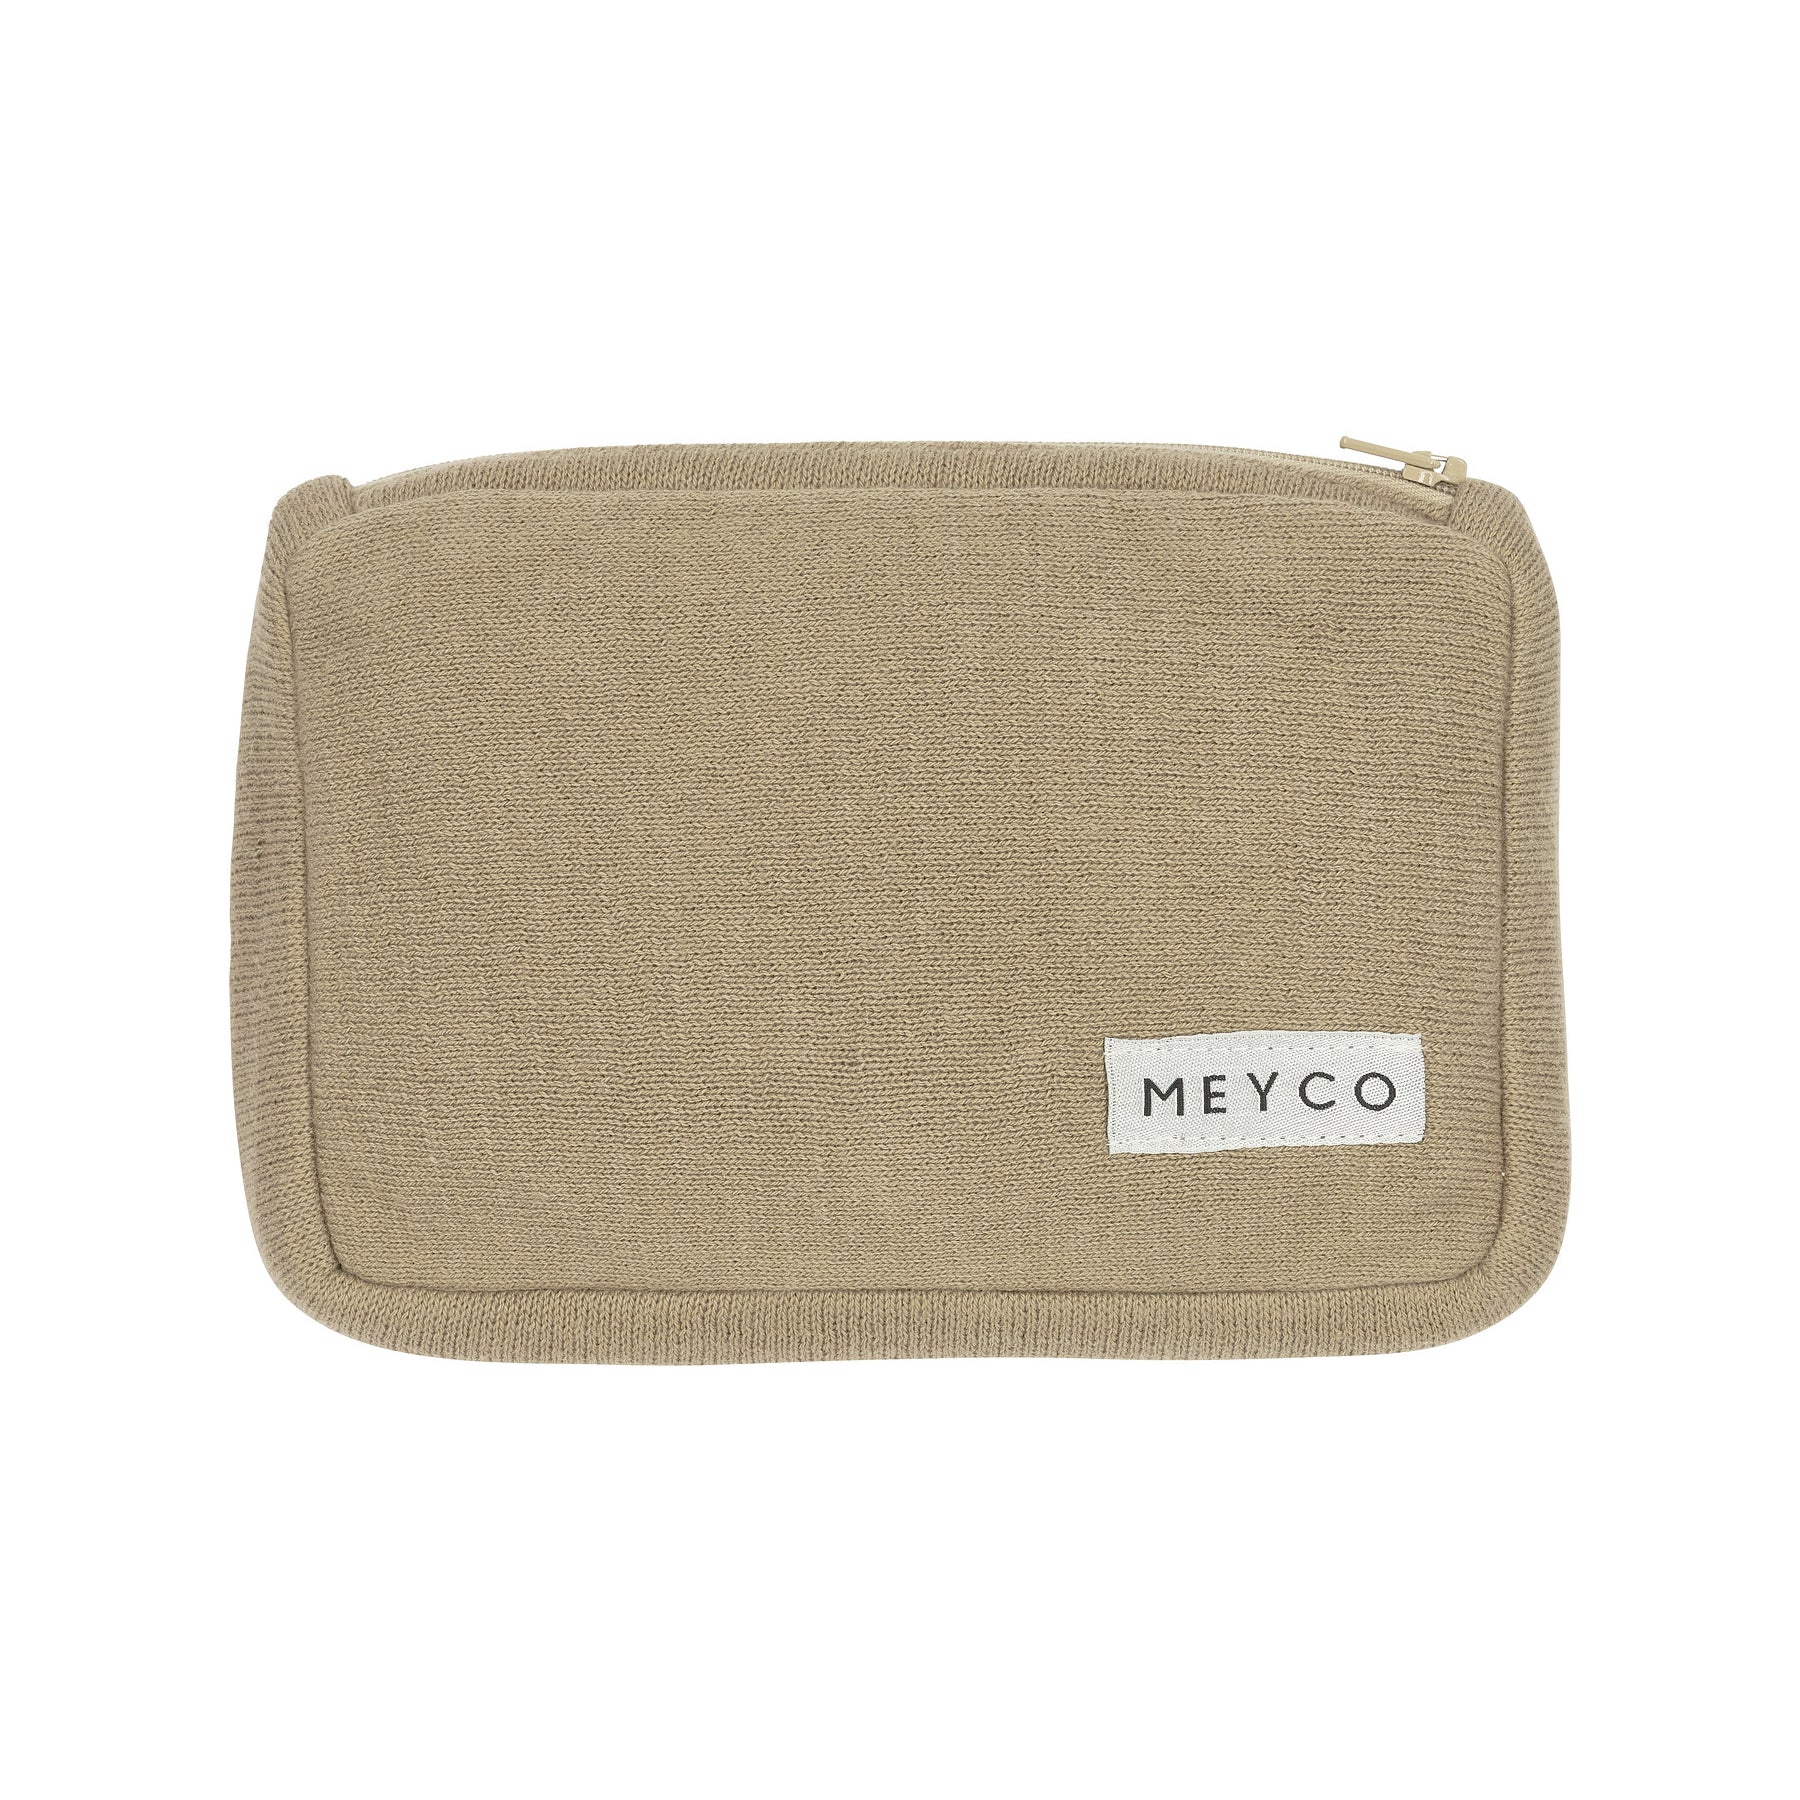 Meyco wipes pouch knit basic taupe